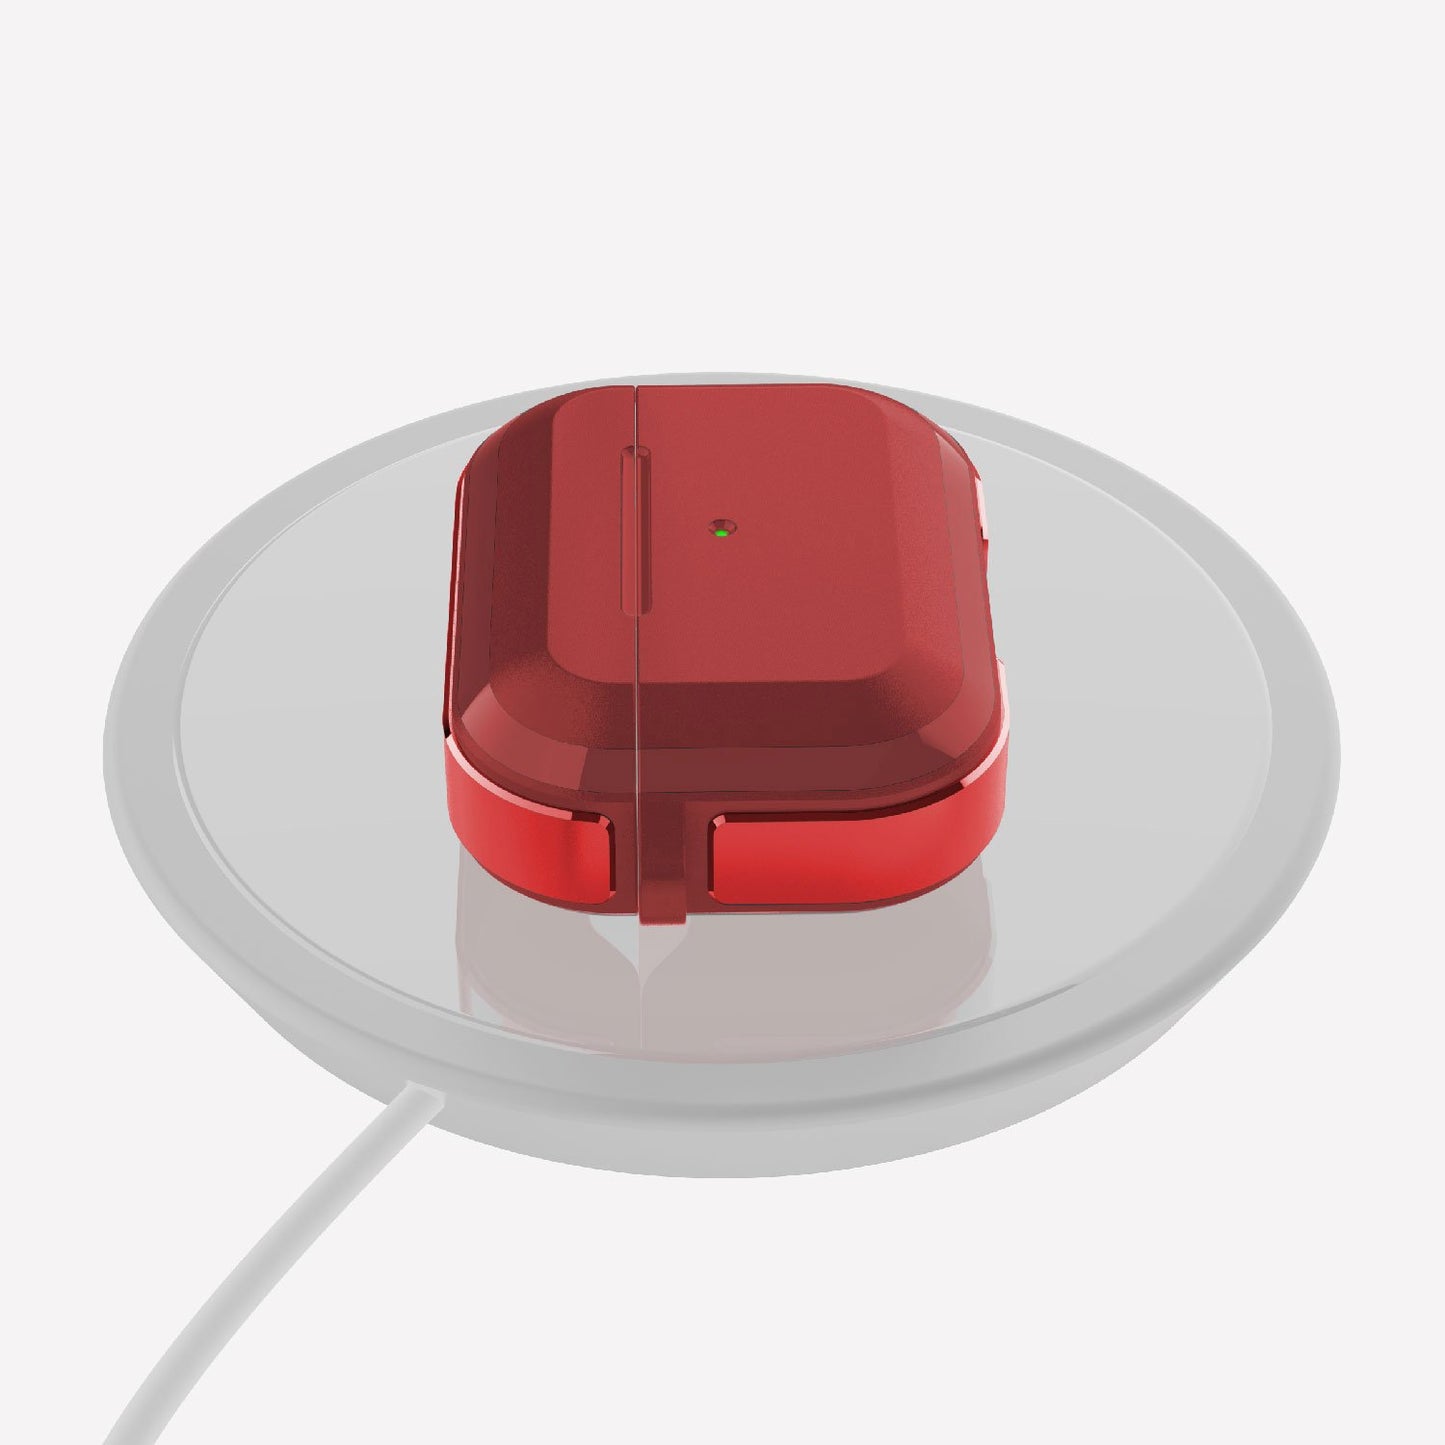 A red wireless charging TREK Apple AirPods Pro case on a white surface.